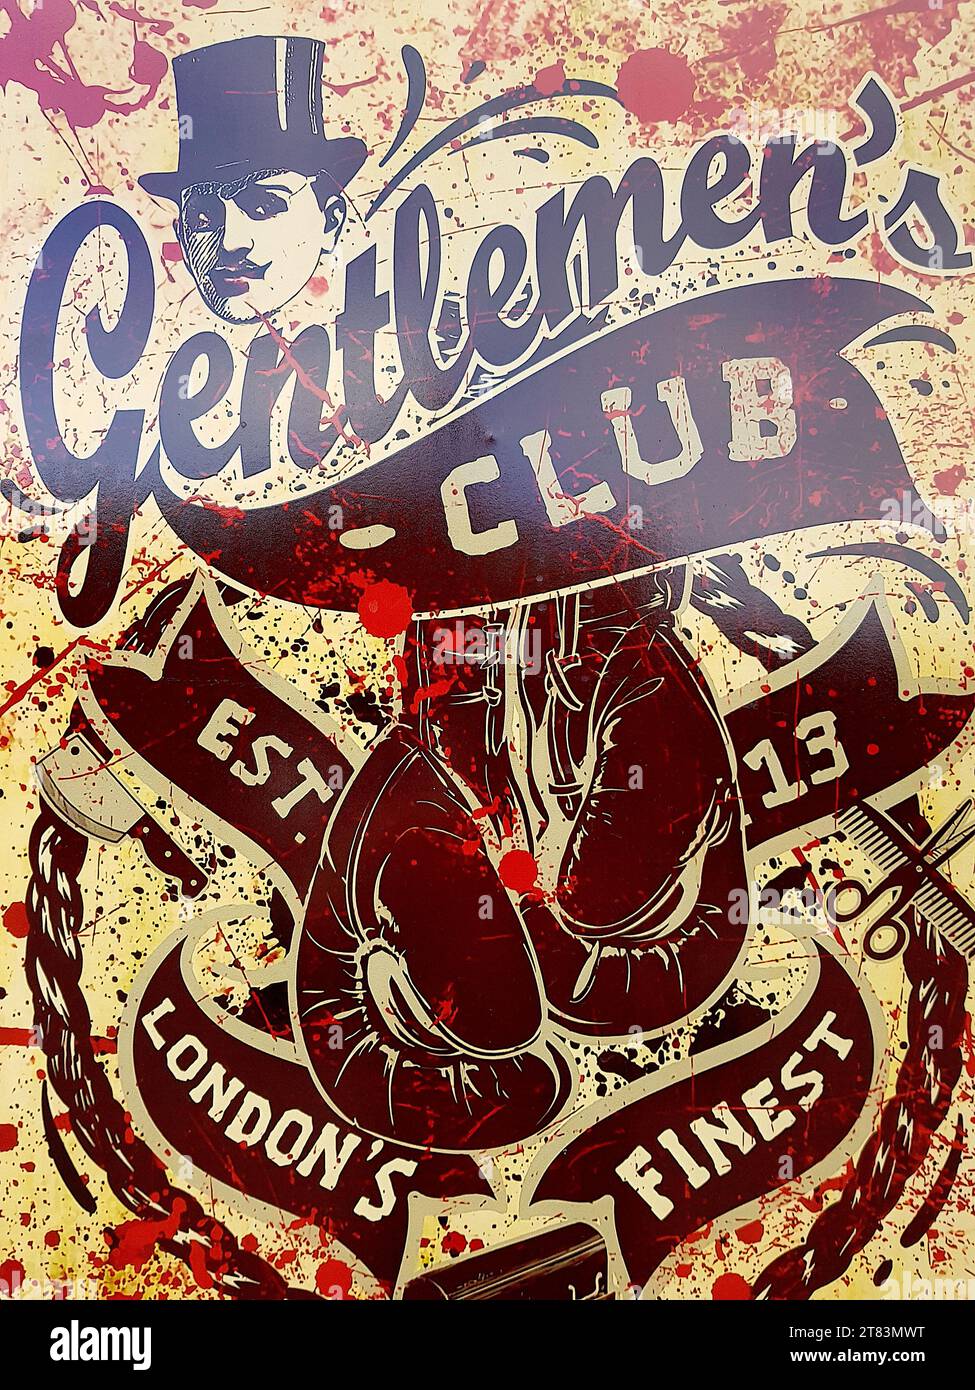 Close up of vintage gentleman's club sign. Stock Photo